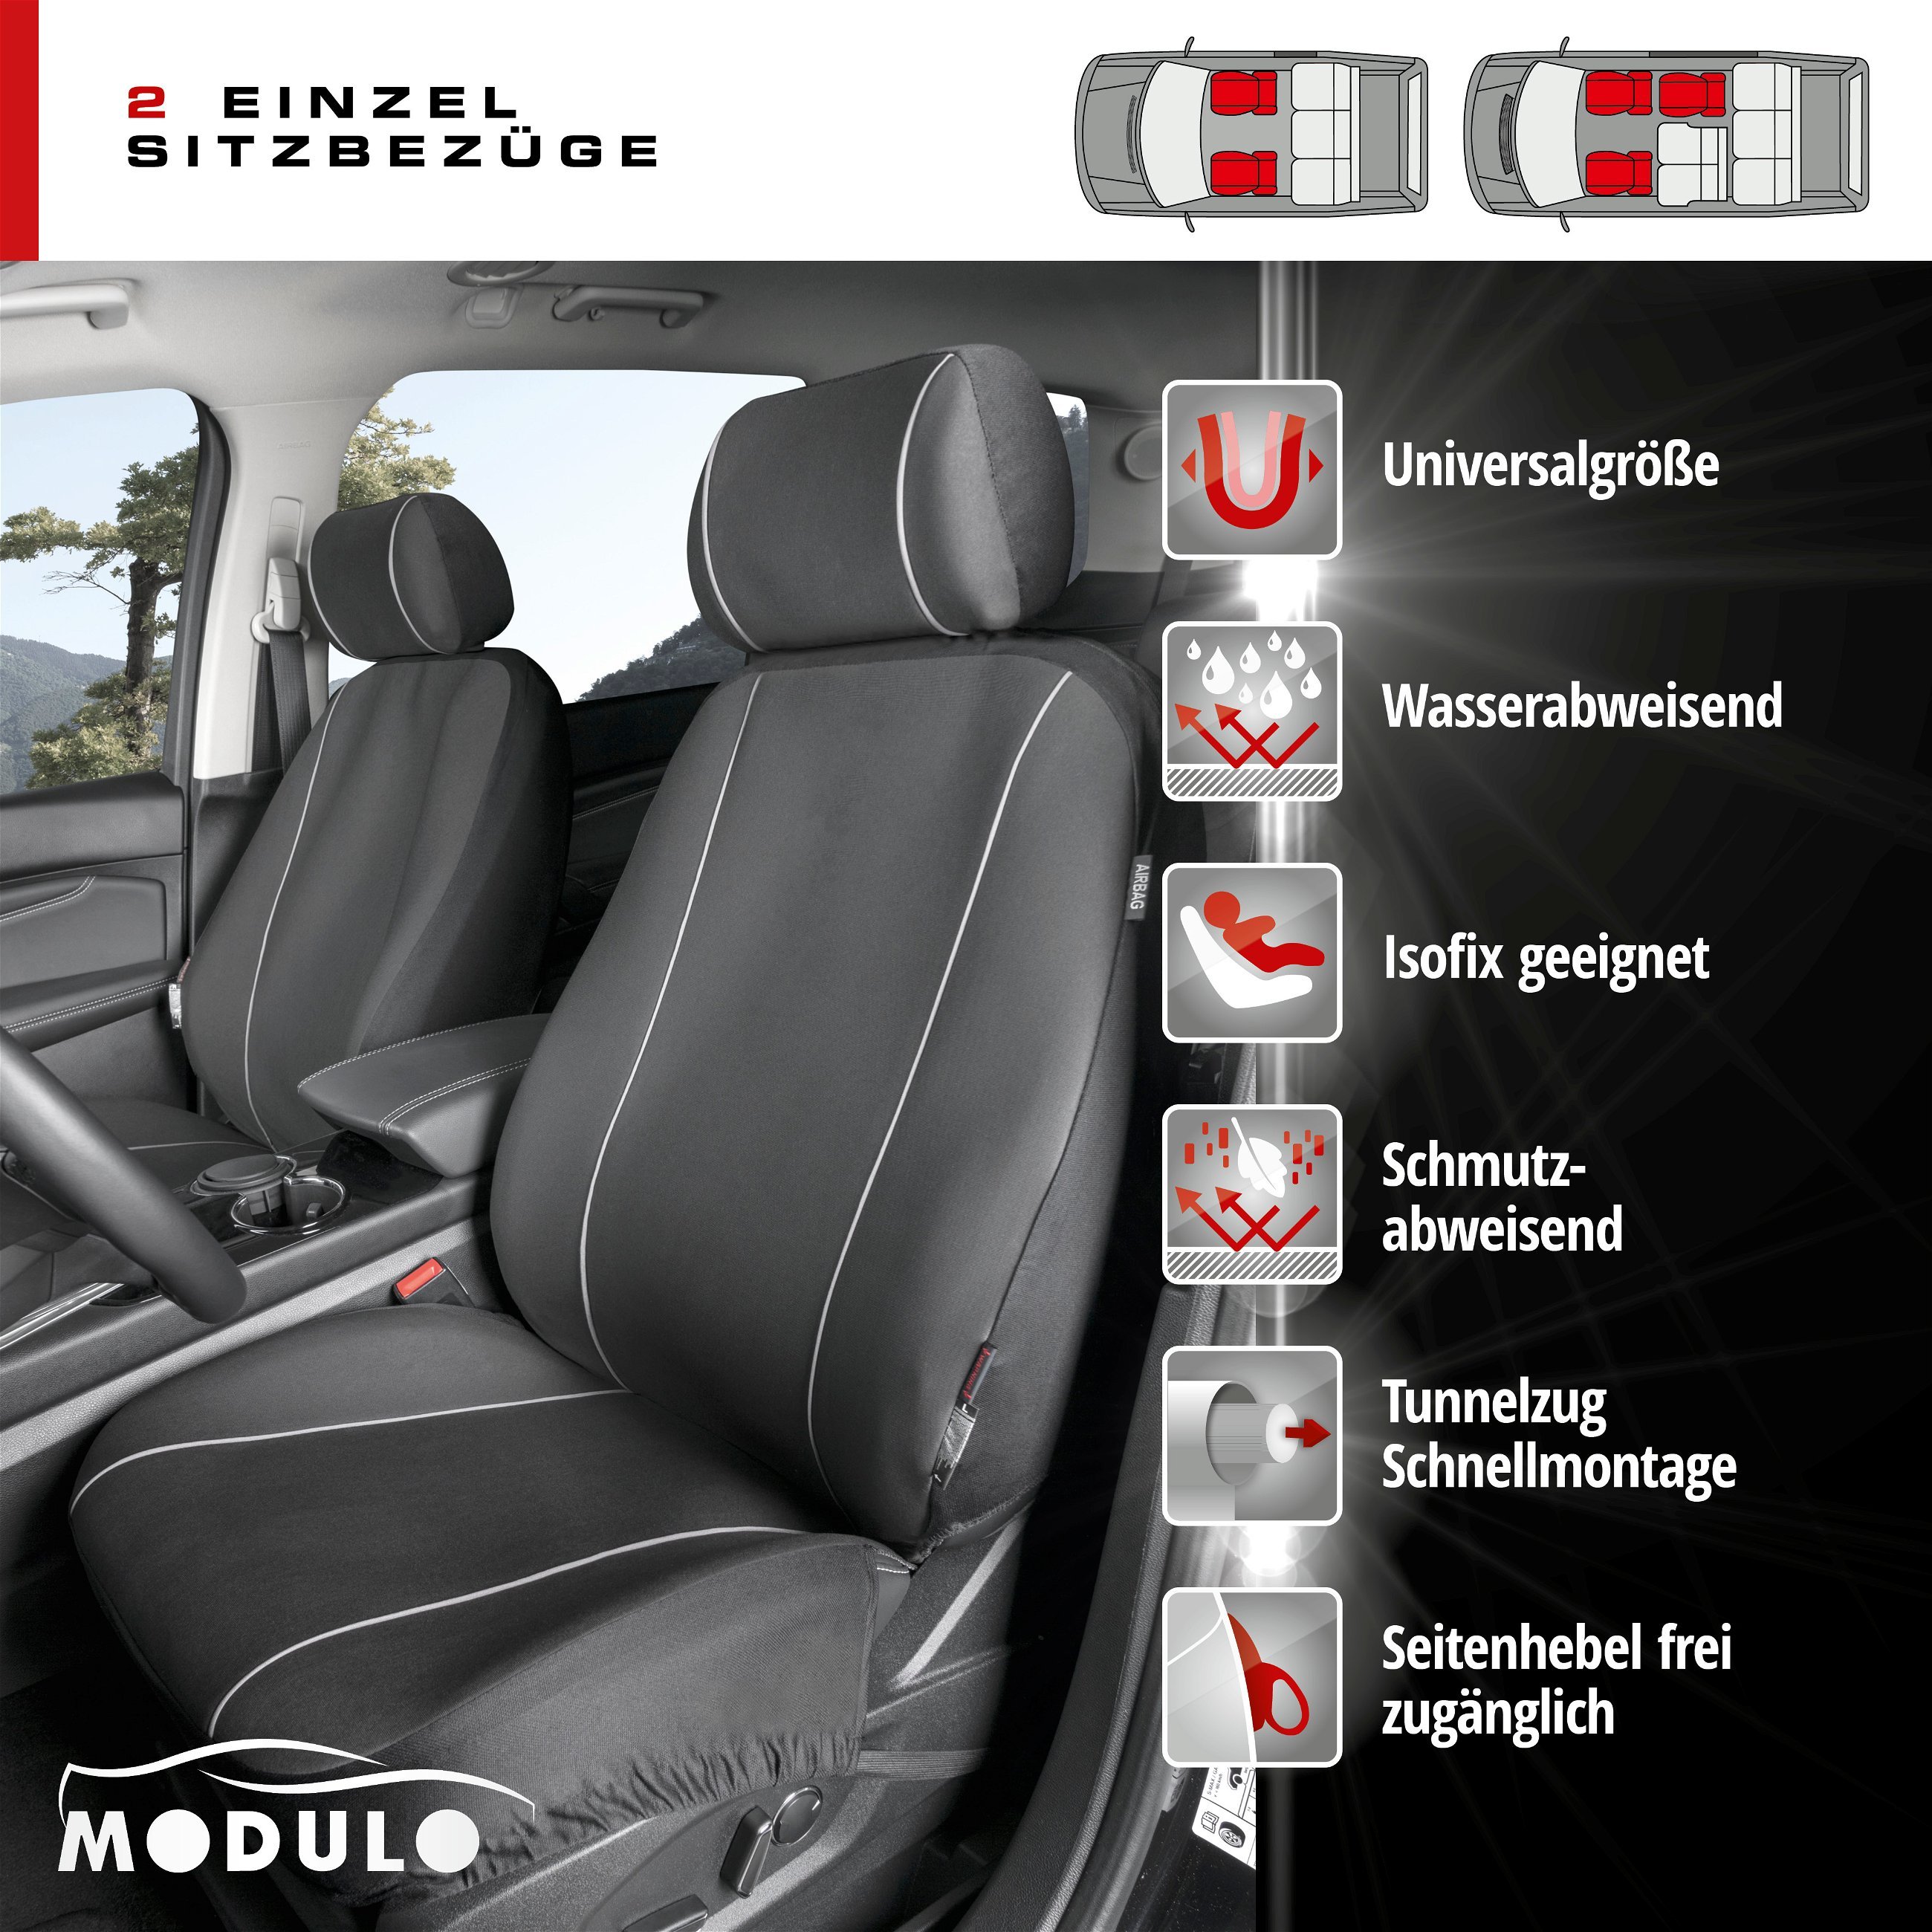 Car Seat cover Modulo for two front seats